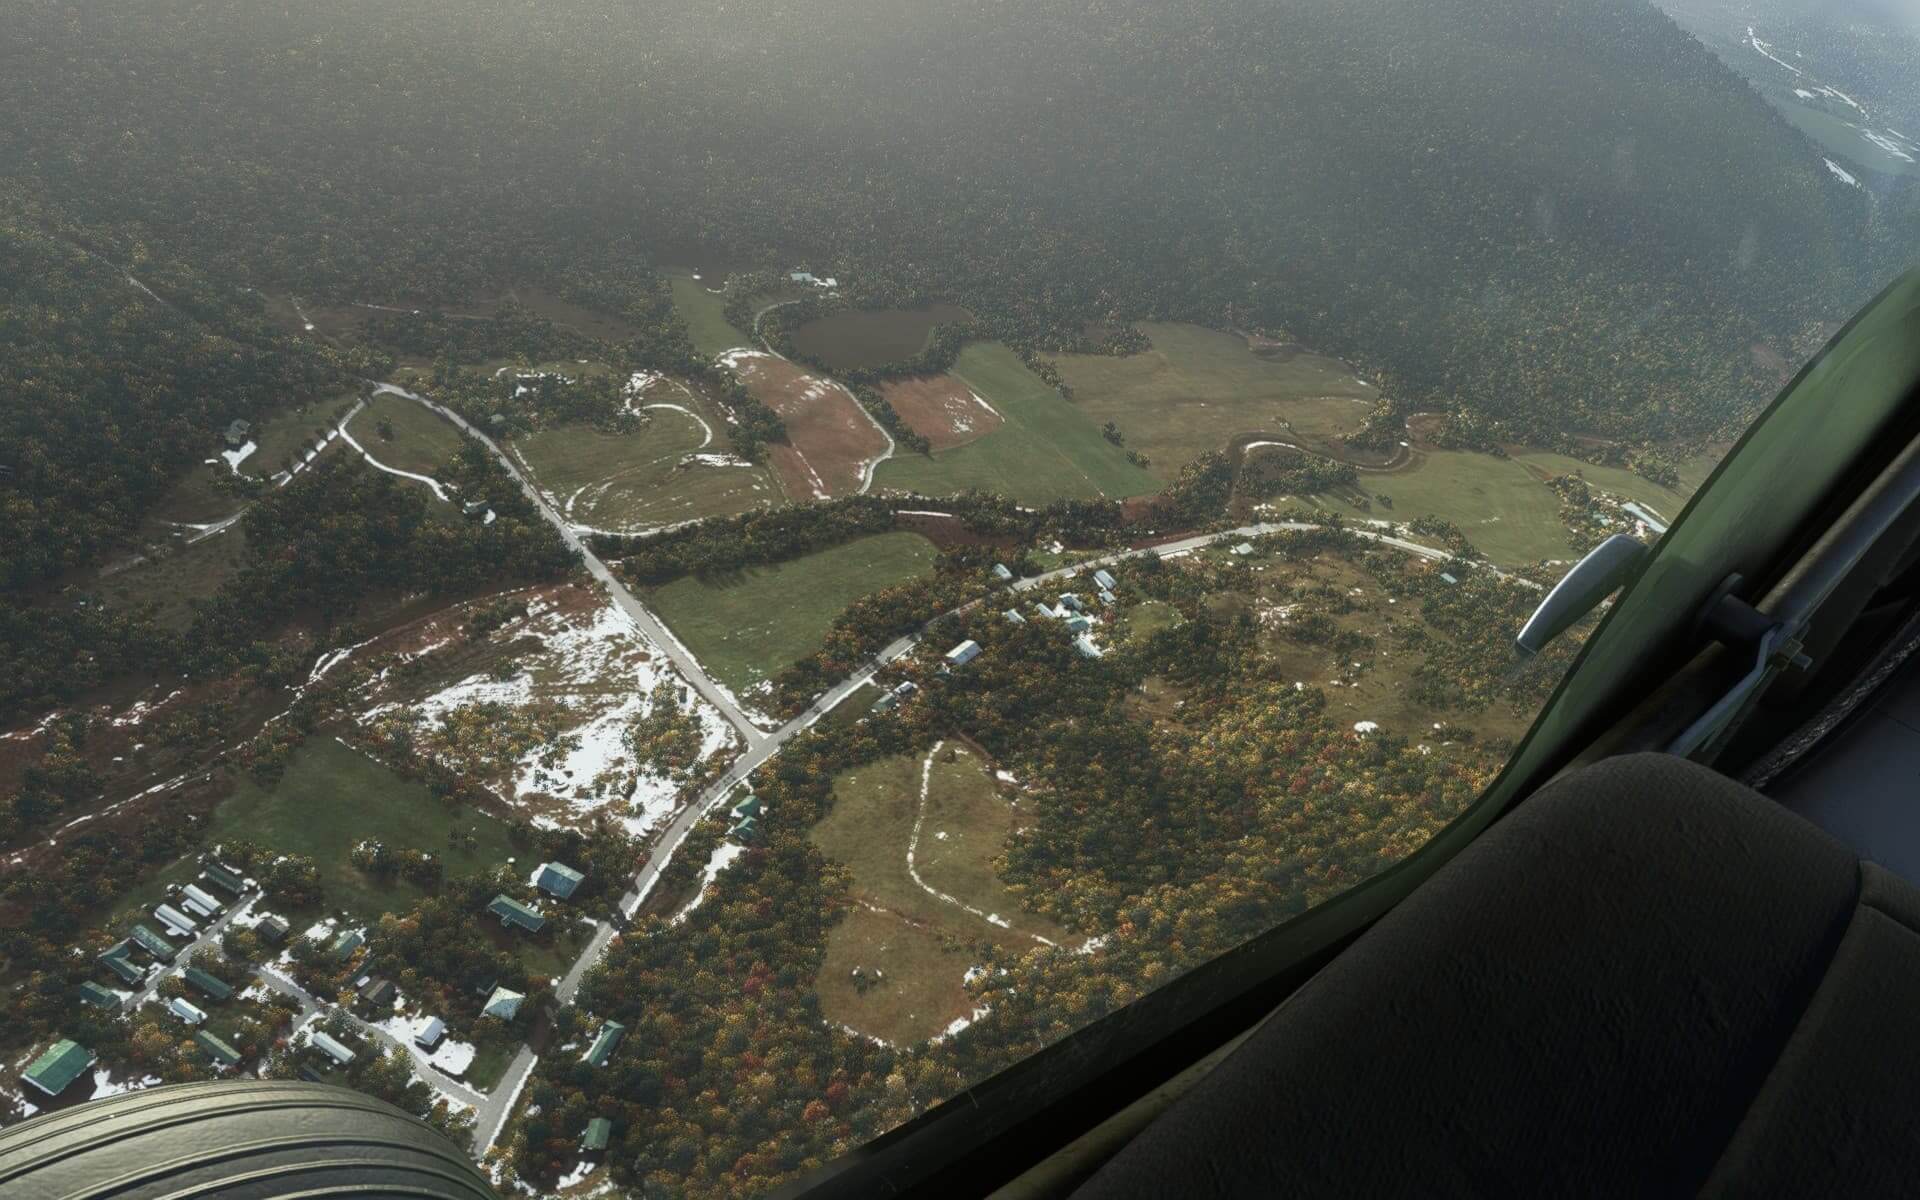 A pilot's perspective looking through the glass from their aircraft down below onto roads surrounded by fields, autumnal trees and scattered areas of snow and ice. 